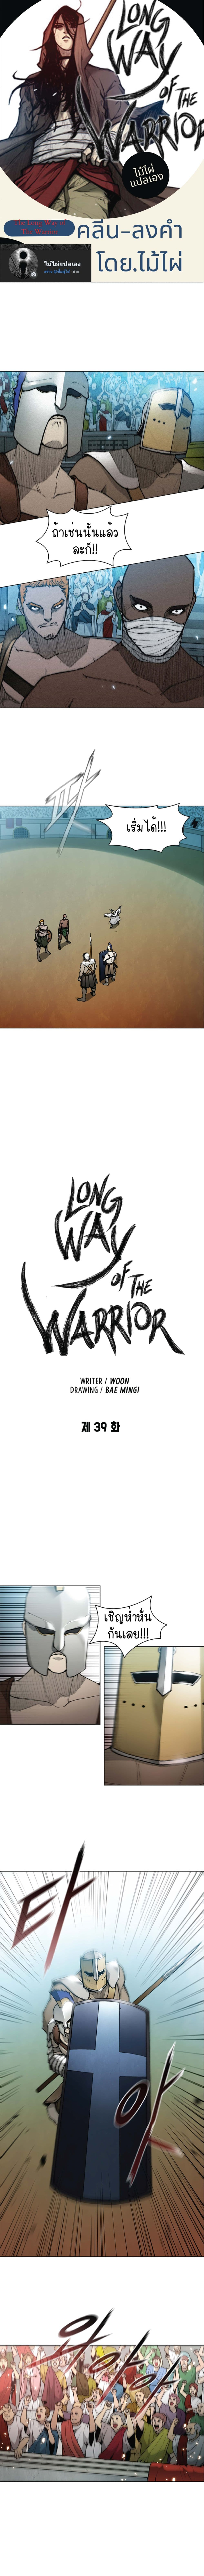 The Long Way of the Warrior 39-39